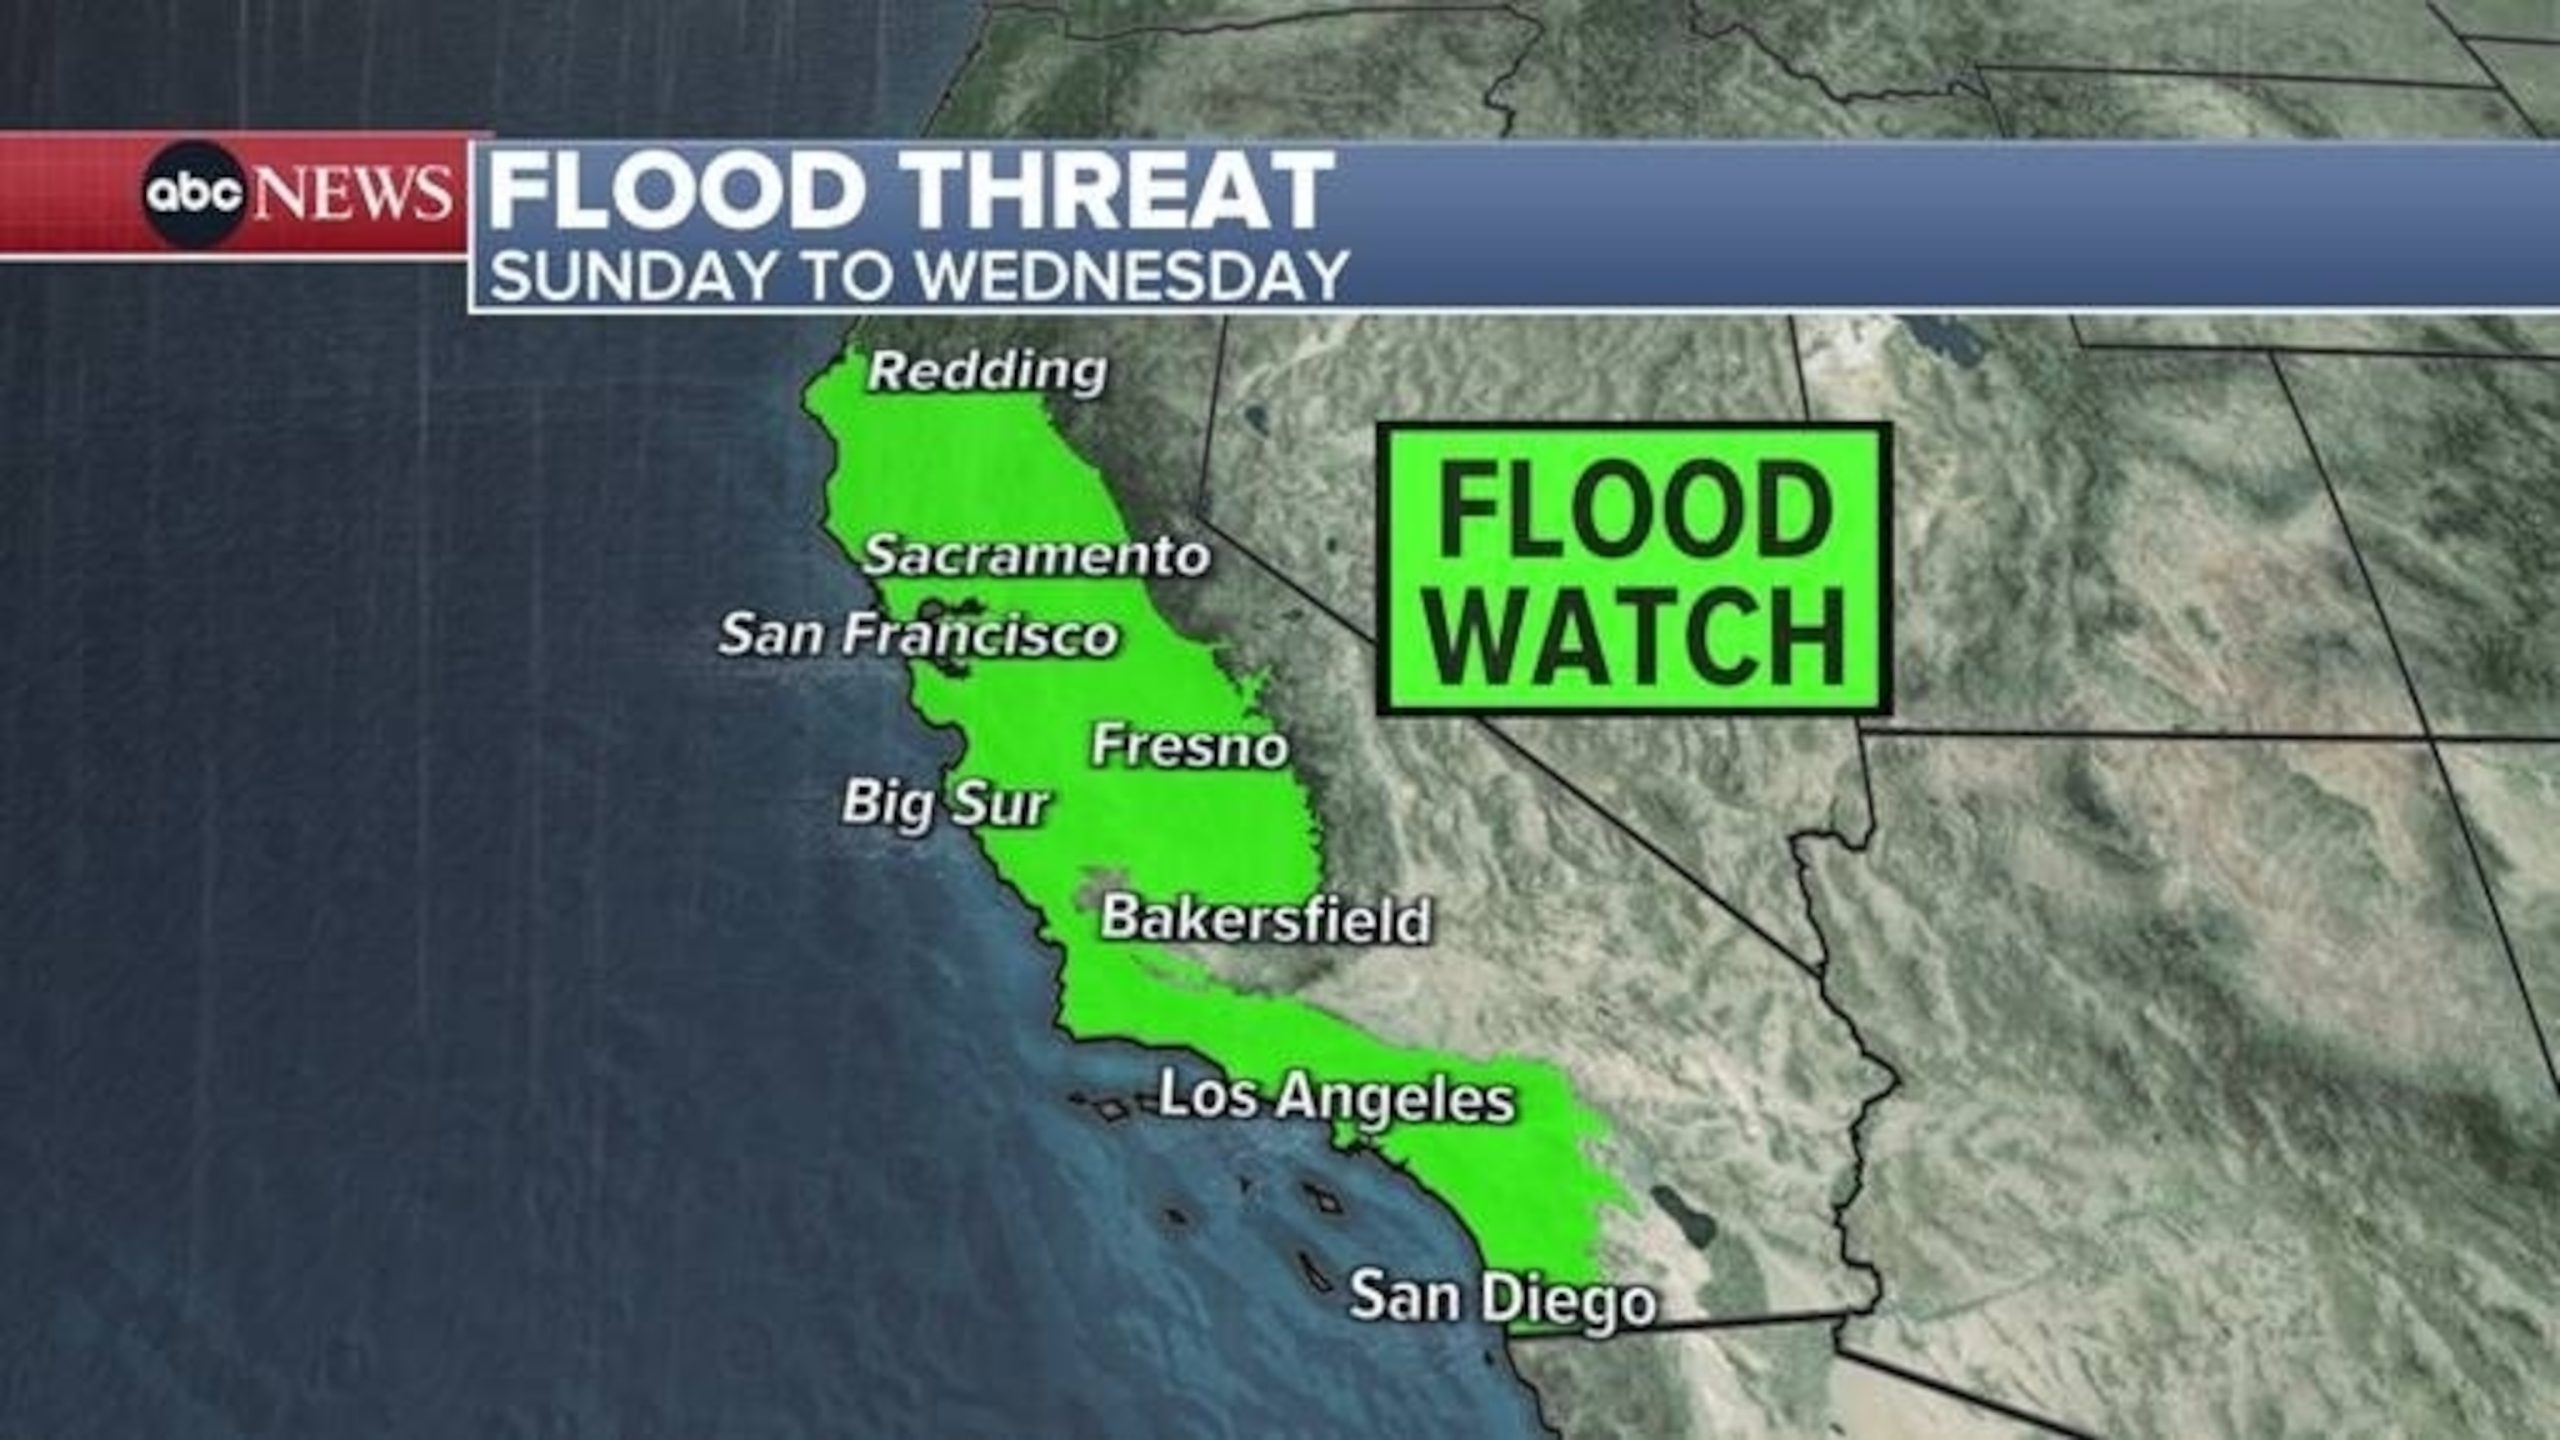 Back-to-back storms put 37 million California residents on flood watch